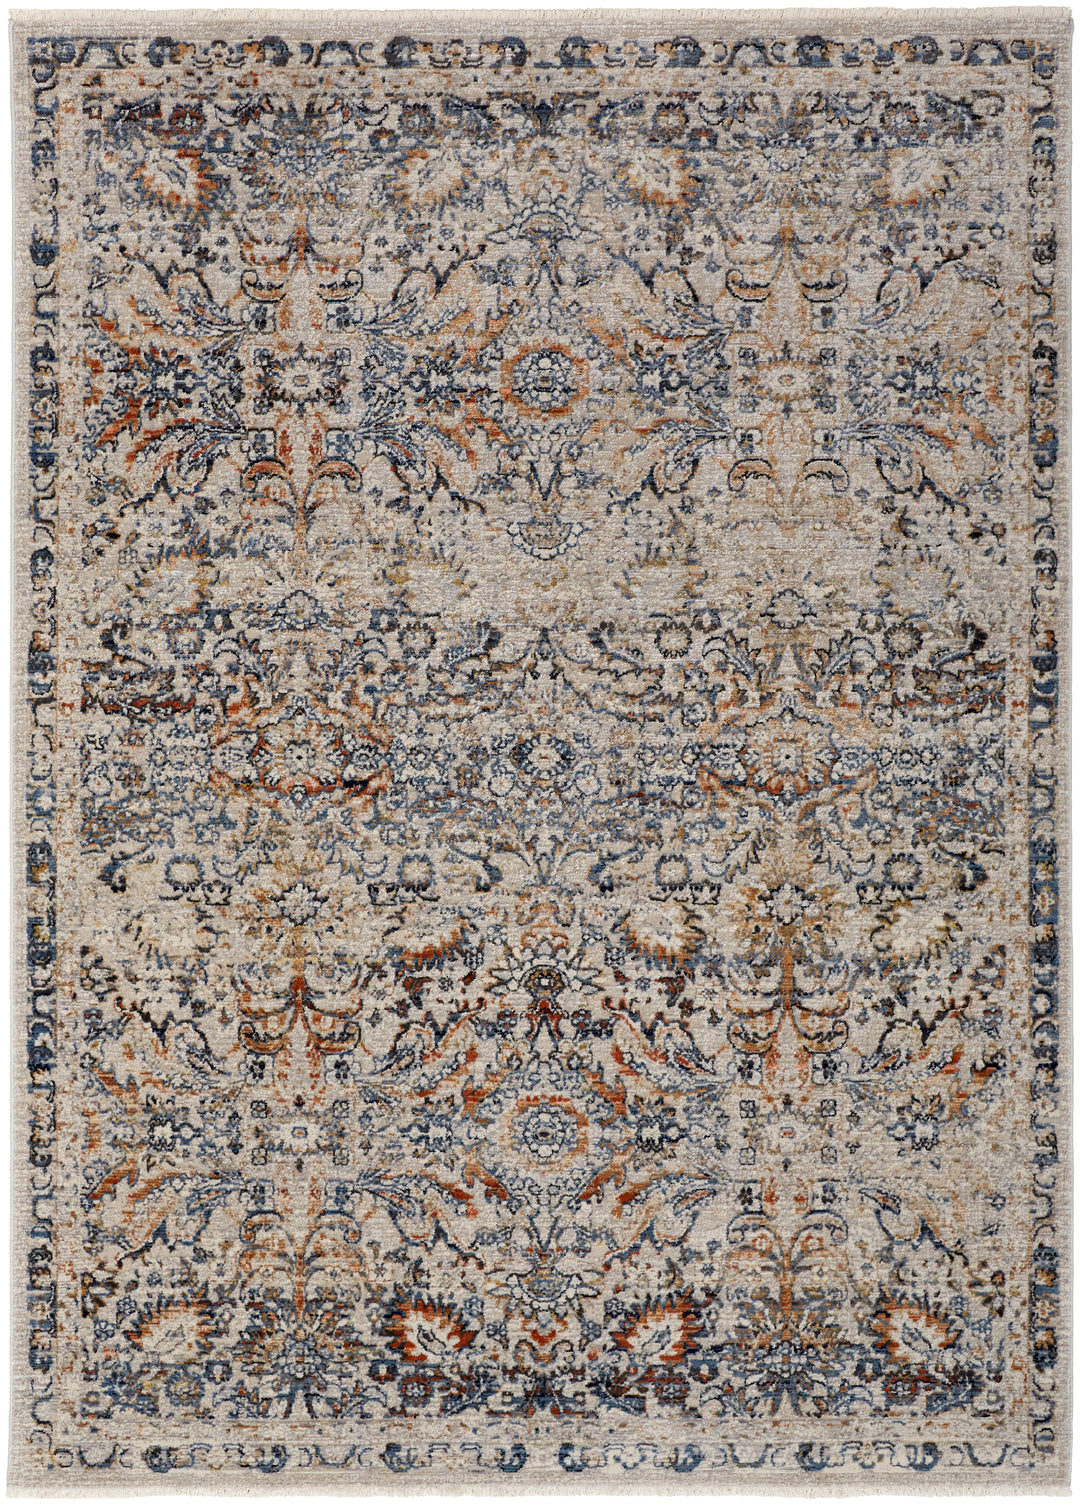 Kaia Transitional Damask in Tan/Blue/Orange Area Rug - Available in 4 Sizes